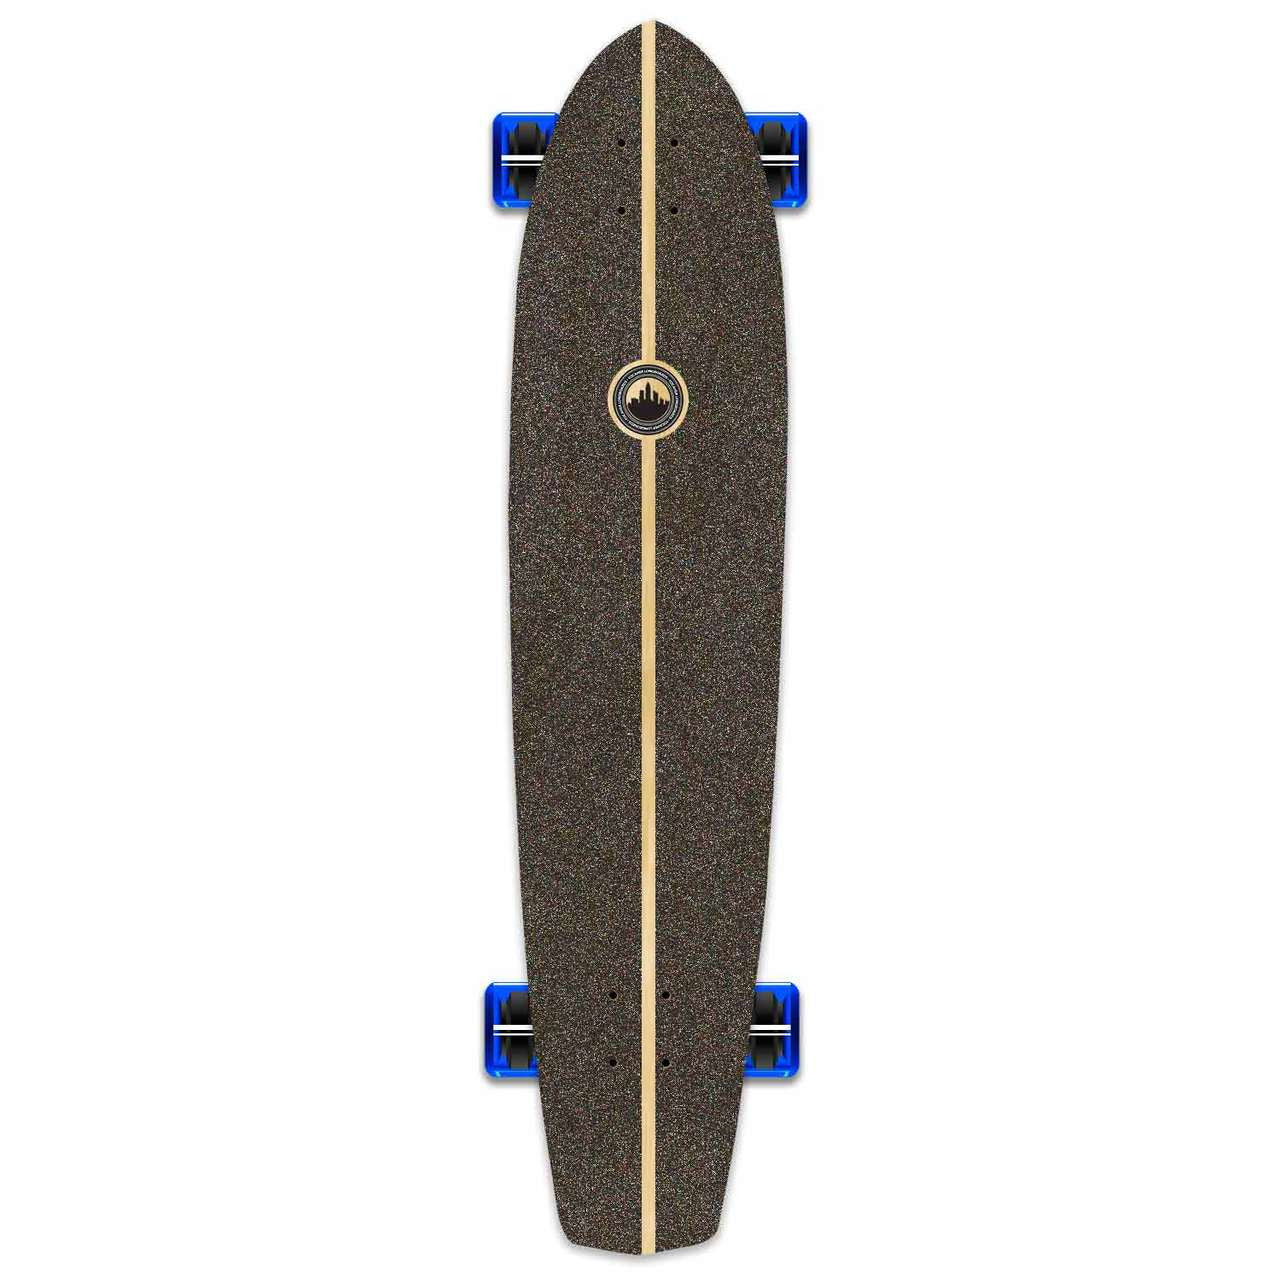 Yocaher Slimkick Longboard Complete - Stained Blue